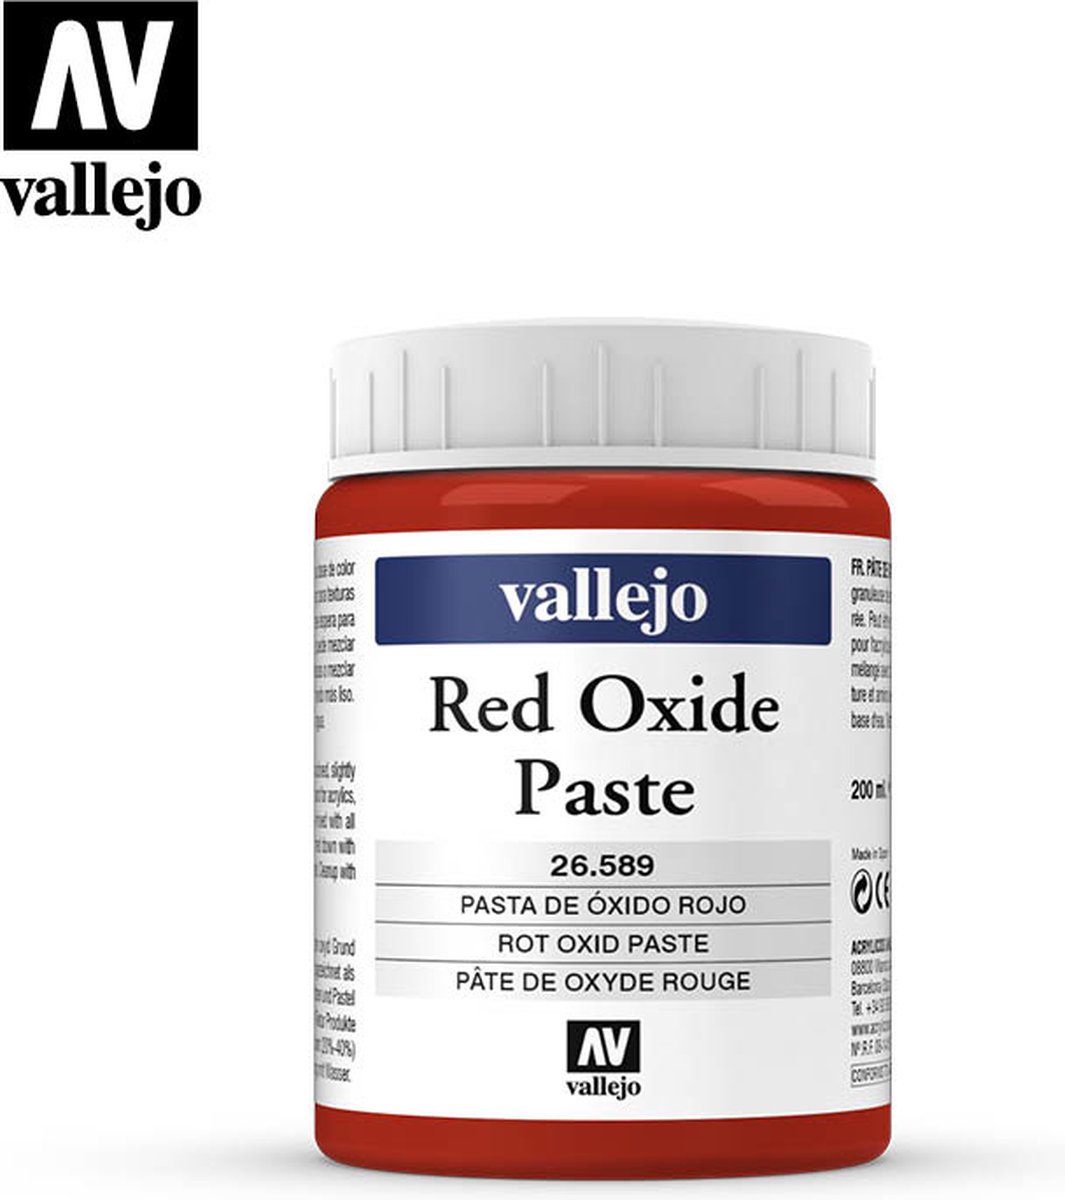 Vallejo val26589 Red Oxid Paste - 200ml